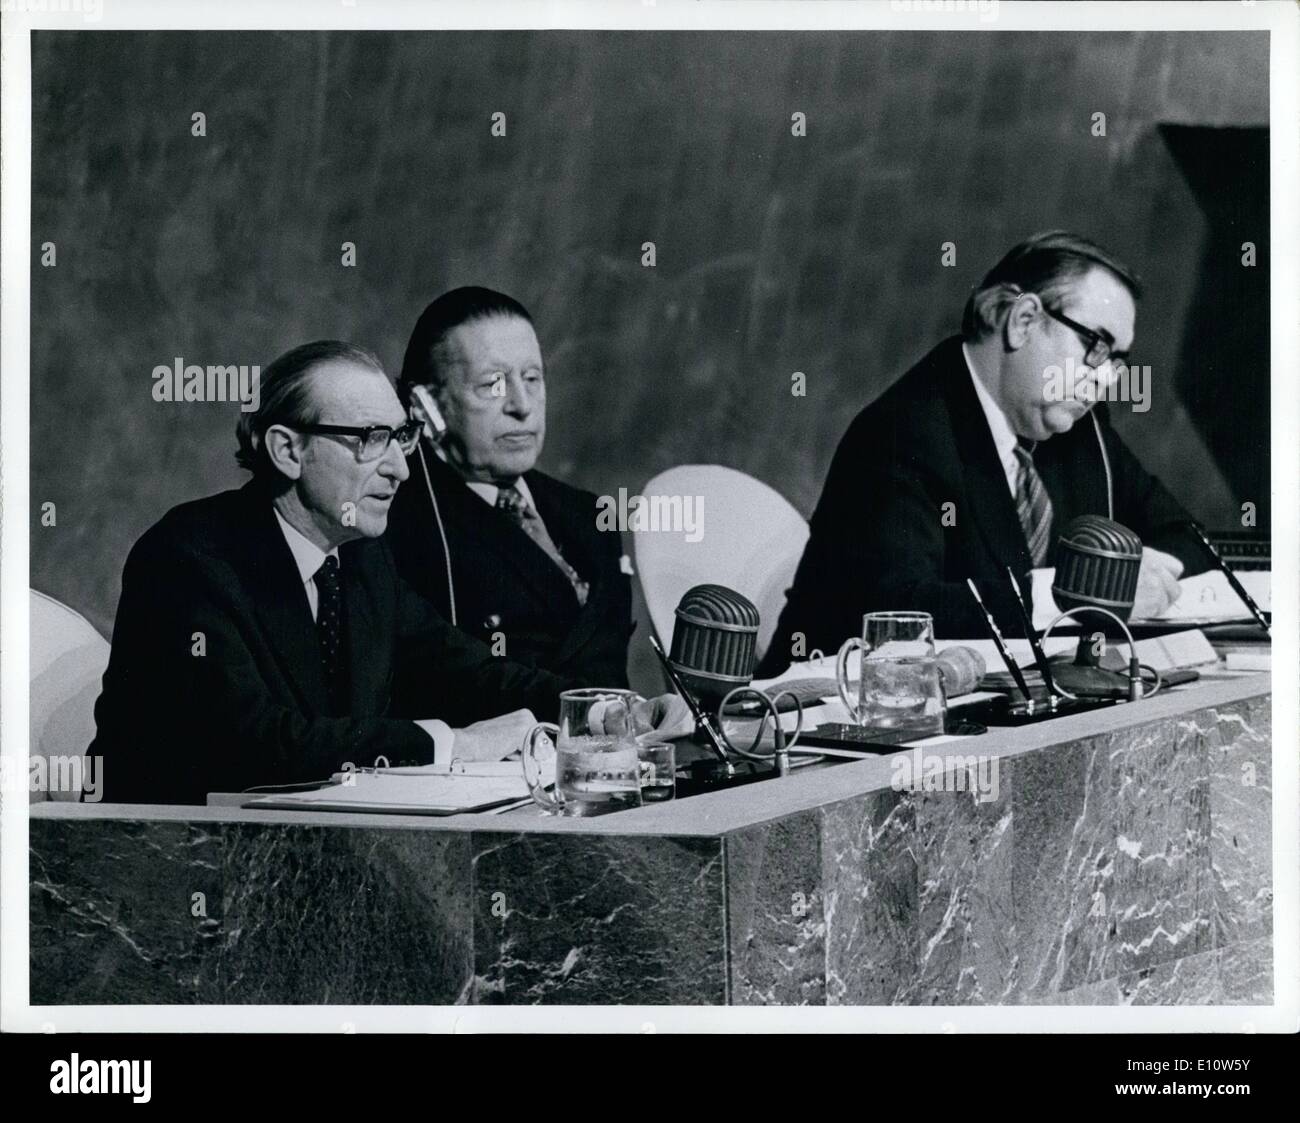 Apr. 04, 1974 - General Assembly Begins Special Session On Raw Materials And Development The General Assembly opened its sixth special session, which was called, at the request of Algeria, to study the problems of raw materials and development. Leopold Benites (Ecuador), President of the twenty-eighth regular session of the Assembly, was elected by acclamation as President of the special session, and an Ad Hoc Committee was established. Secretary-General Kurt Waldheim addressing the Assembly Stock Photo